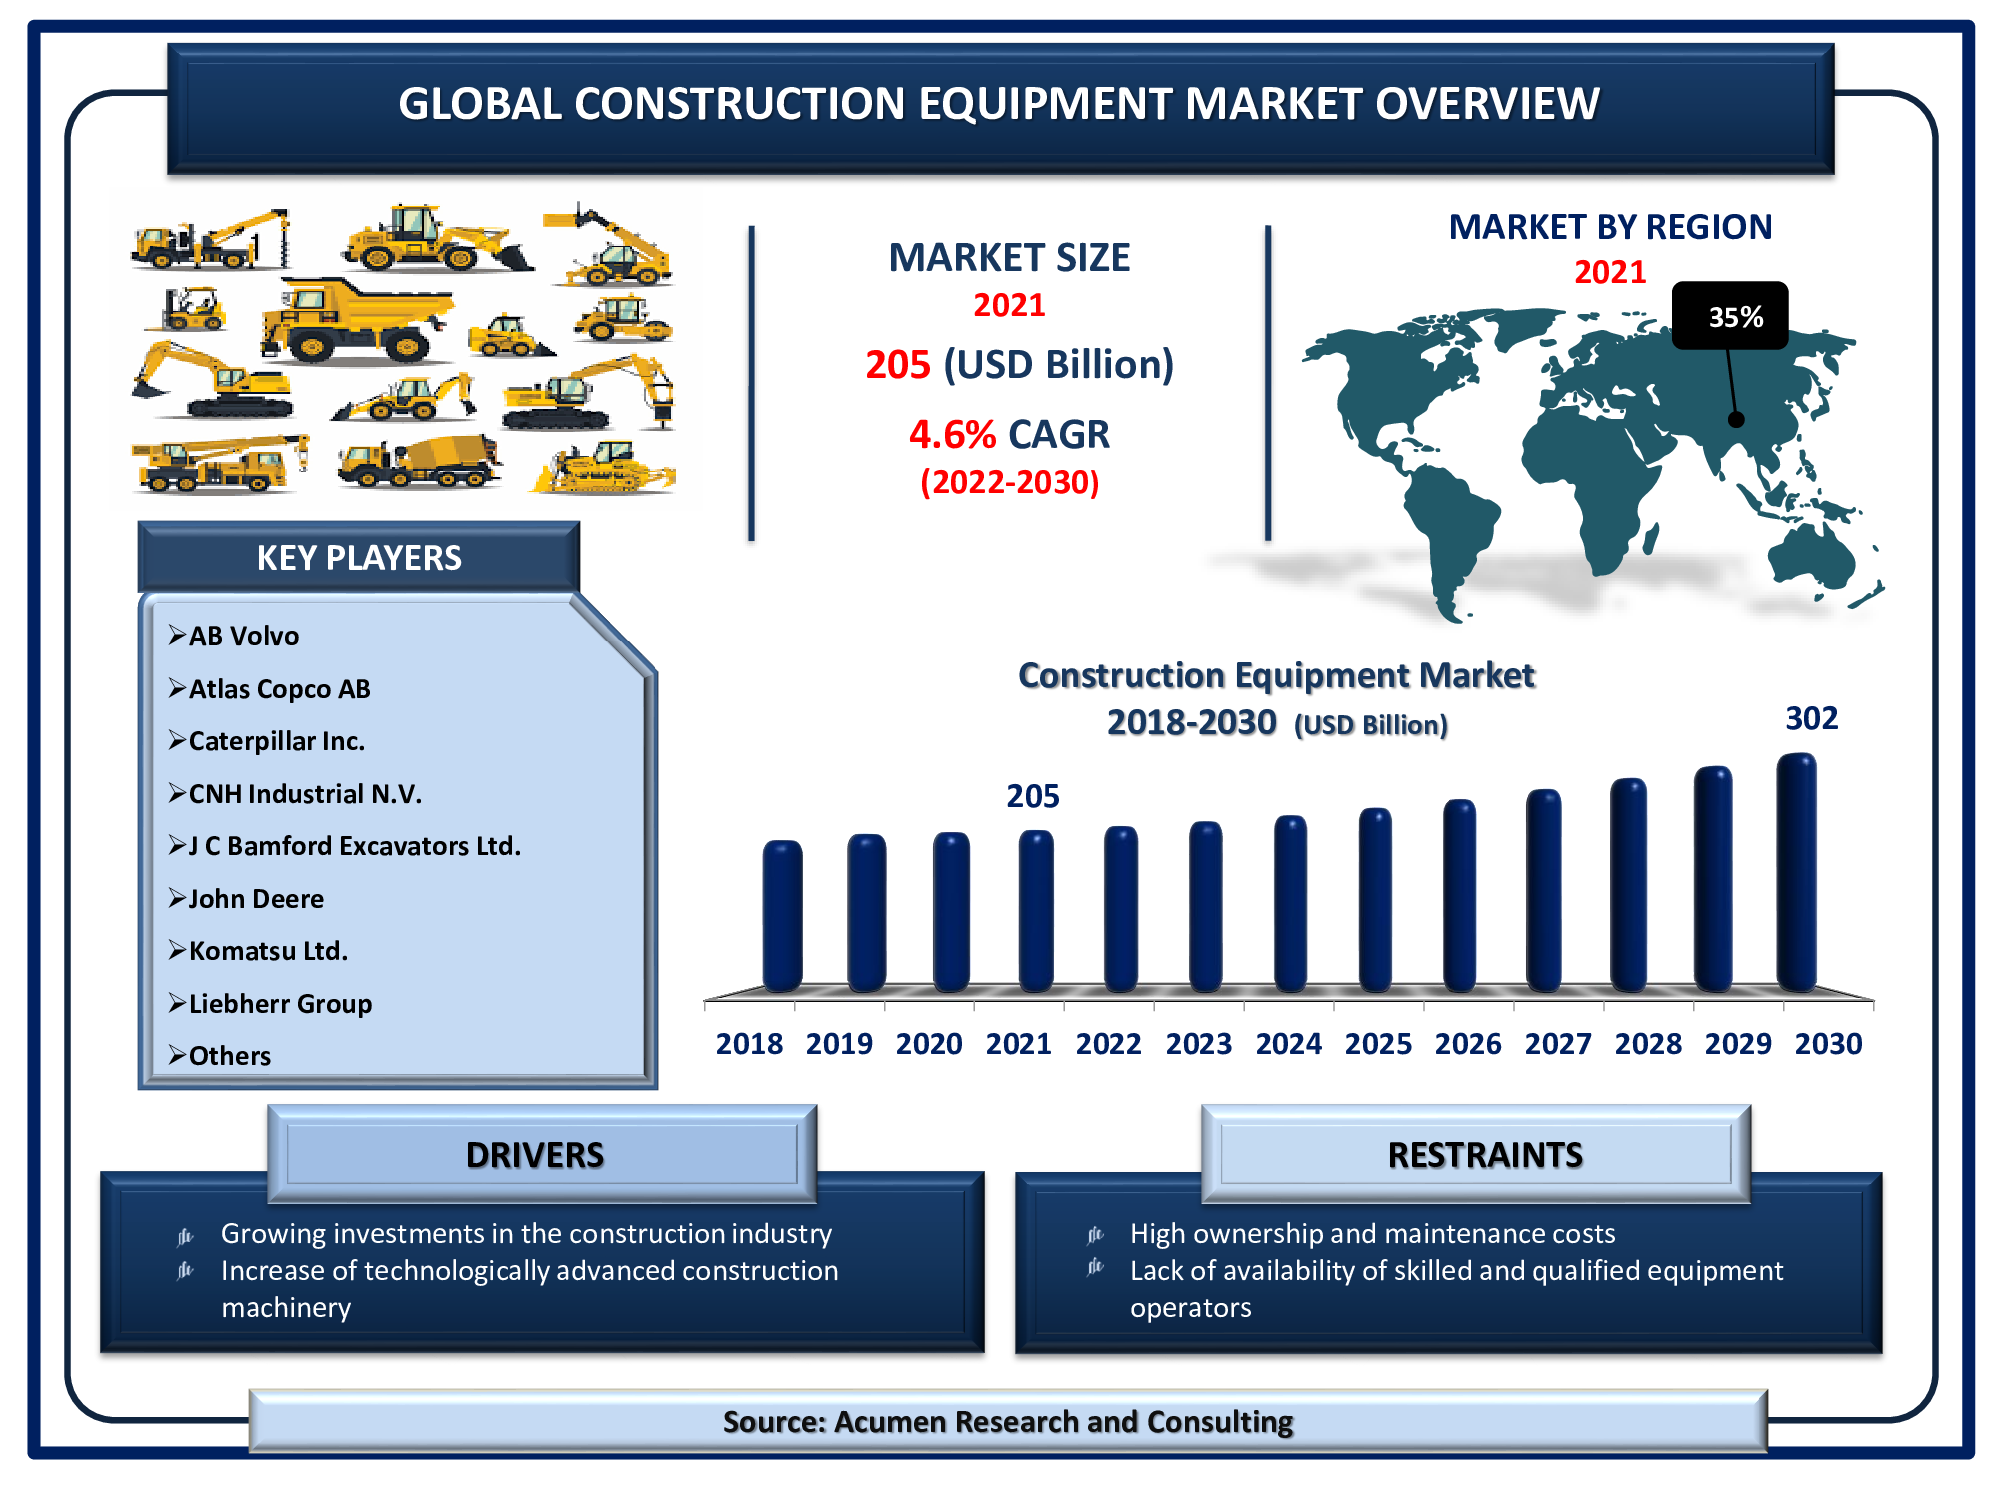 The Global Construction Equipment Market Size is valued at USD 205 Billion in 2021 and is estimated to achieve a market size of USD 302 Billion by 2030; growing at a CAGR of 4.6%.